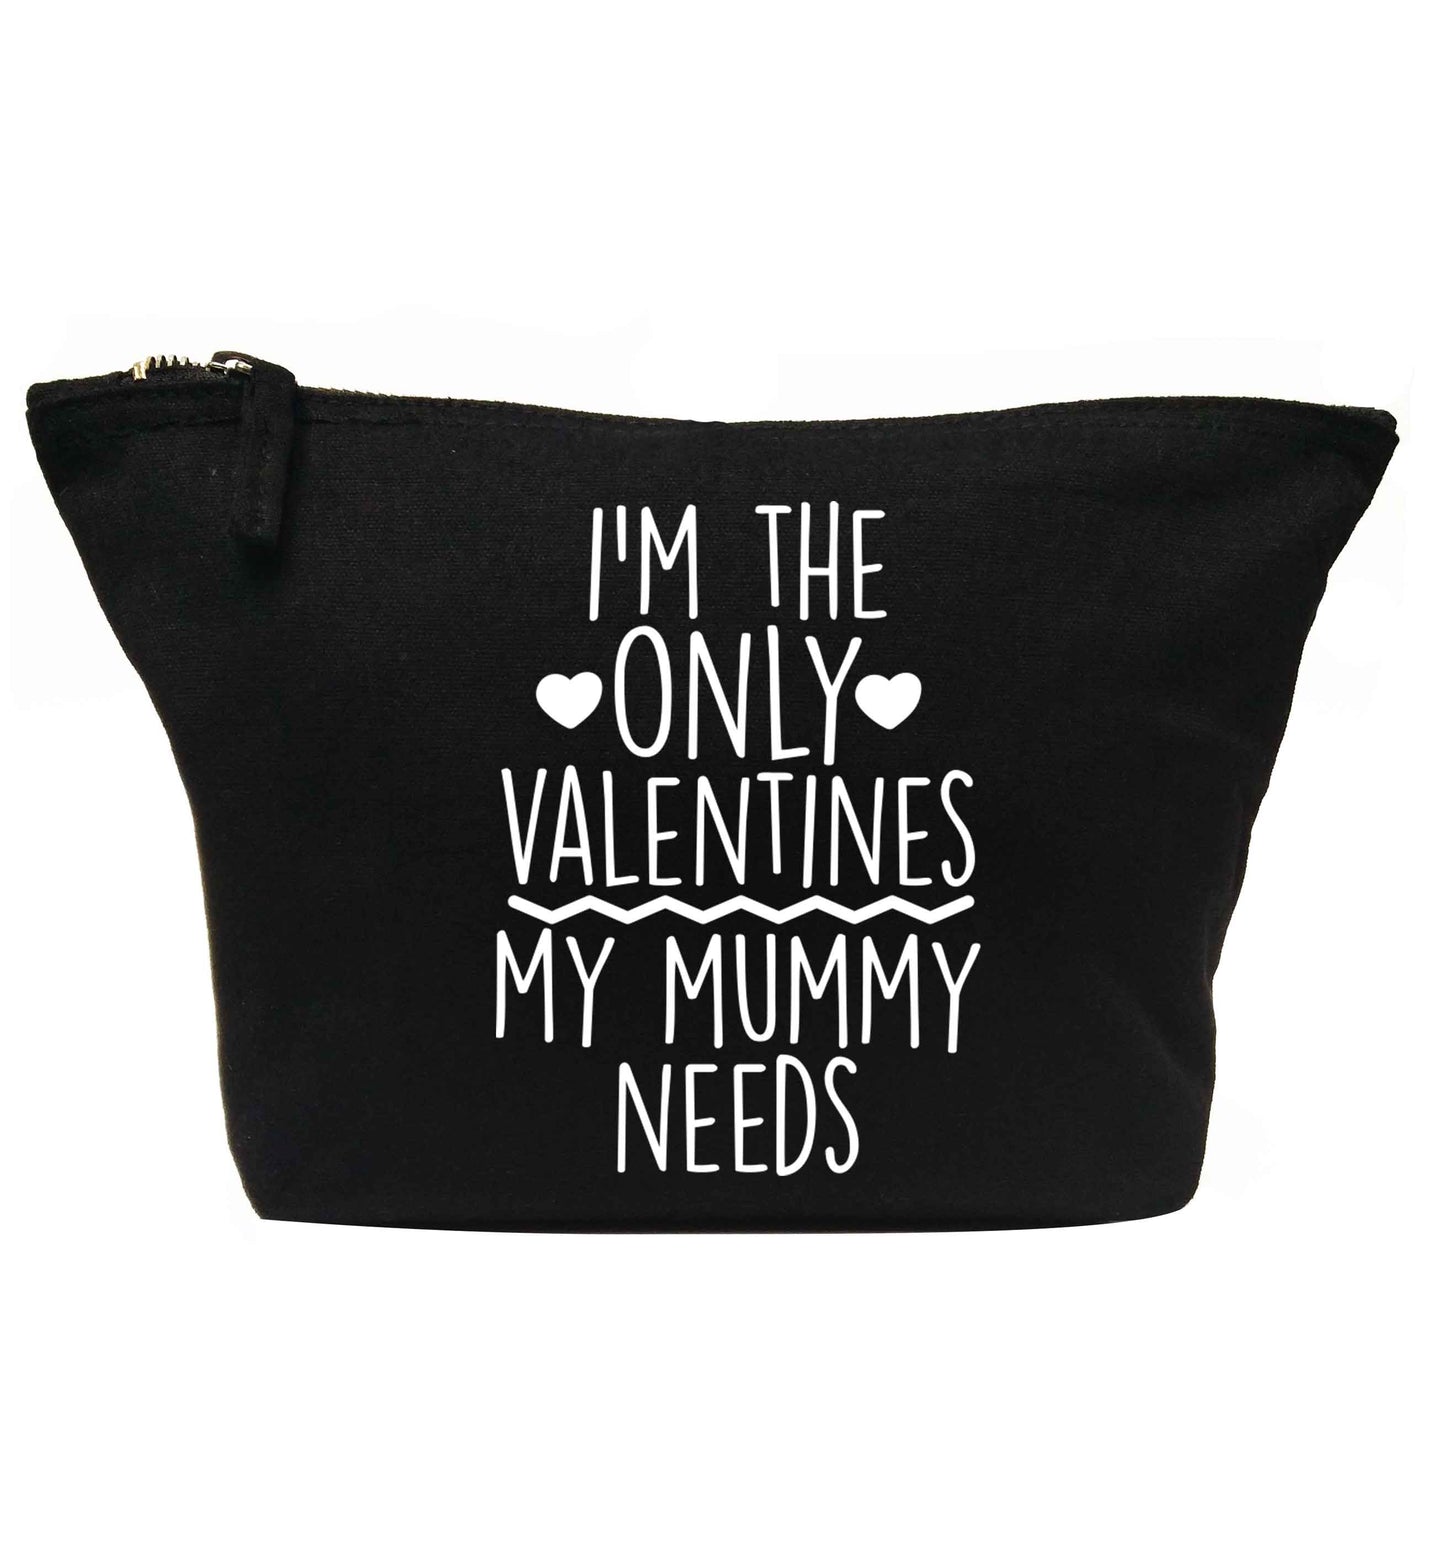 I'm the only valentines my mummy needs | Makeup / wash bag